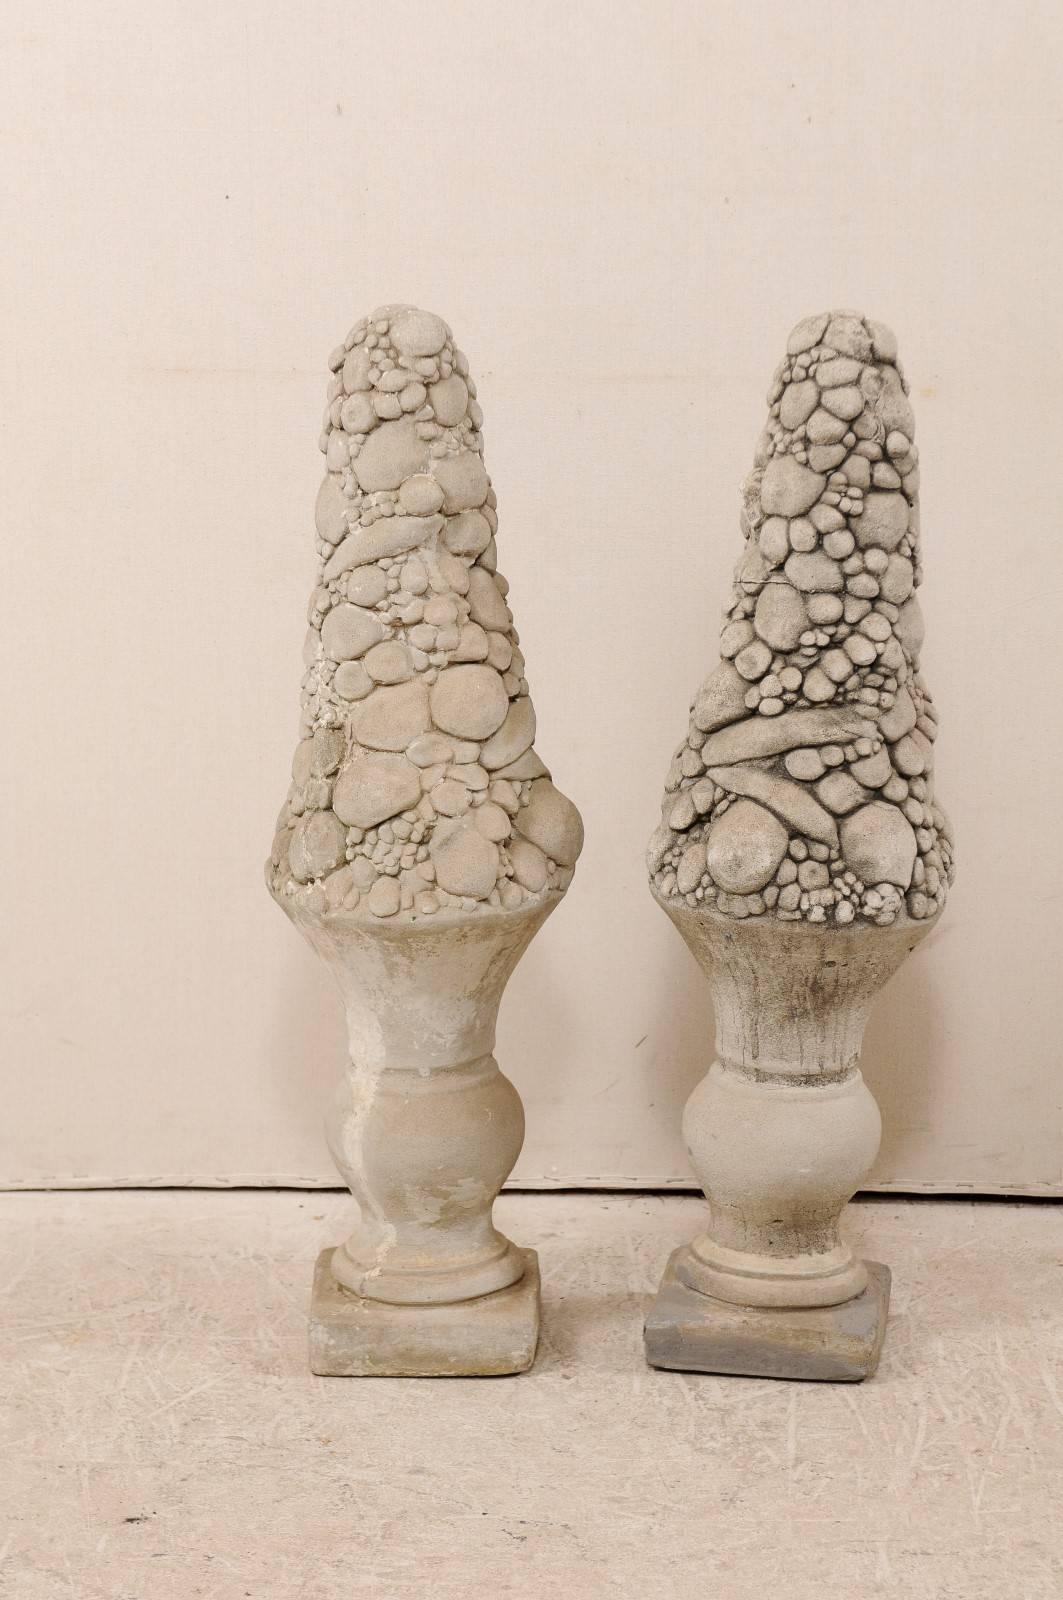 A pair of American, mid-20th century fruit topiaries. This pair of Mid-Century fruit topiaries are made from cast stone, which has been nicely weathered with age. These fruit topiaries would be a nice addition to any garden, patio or flanking a